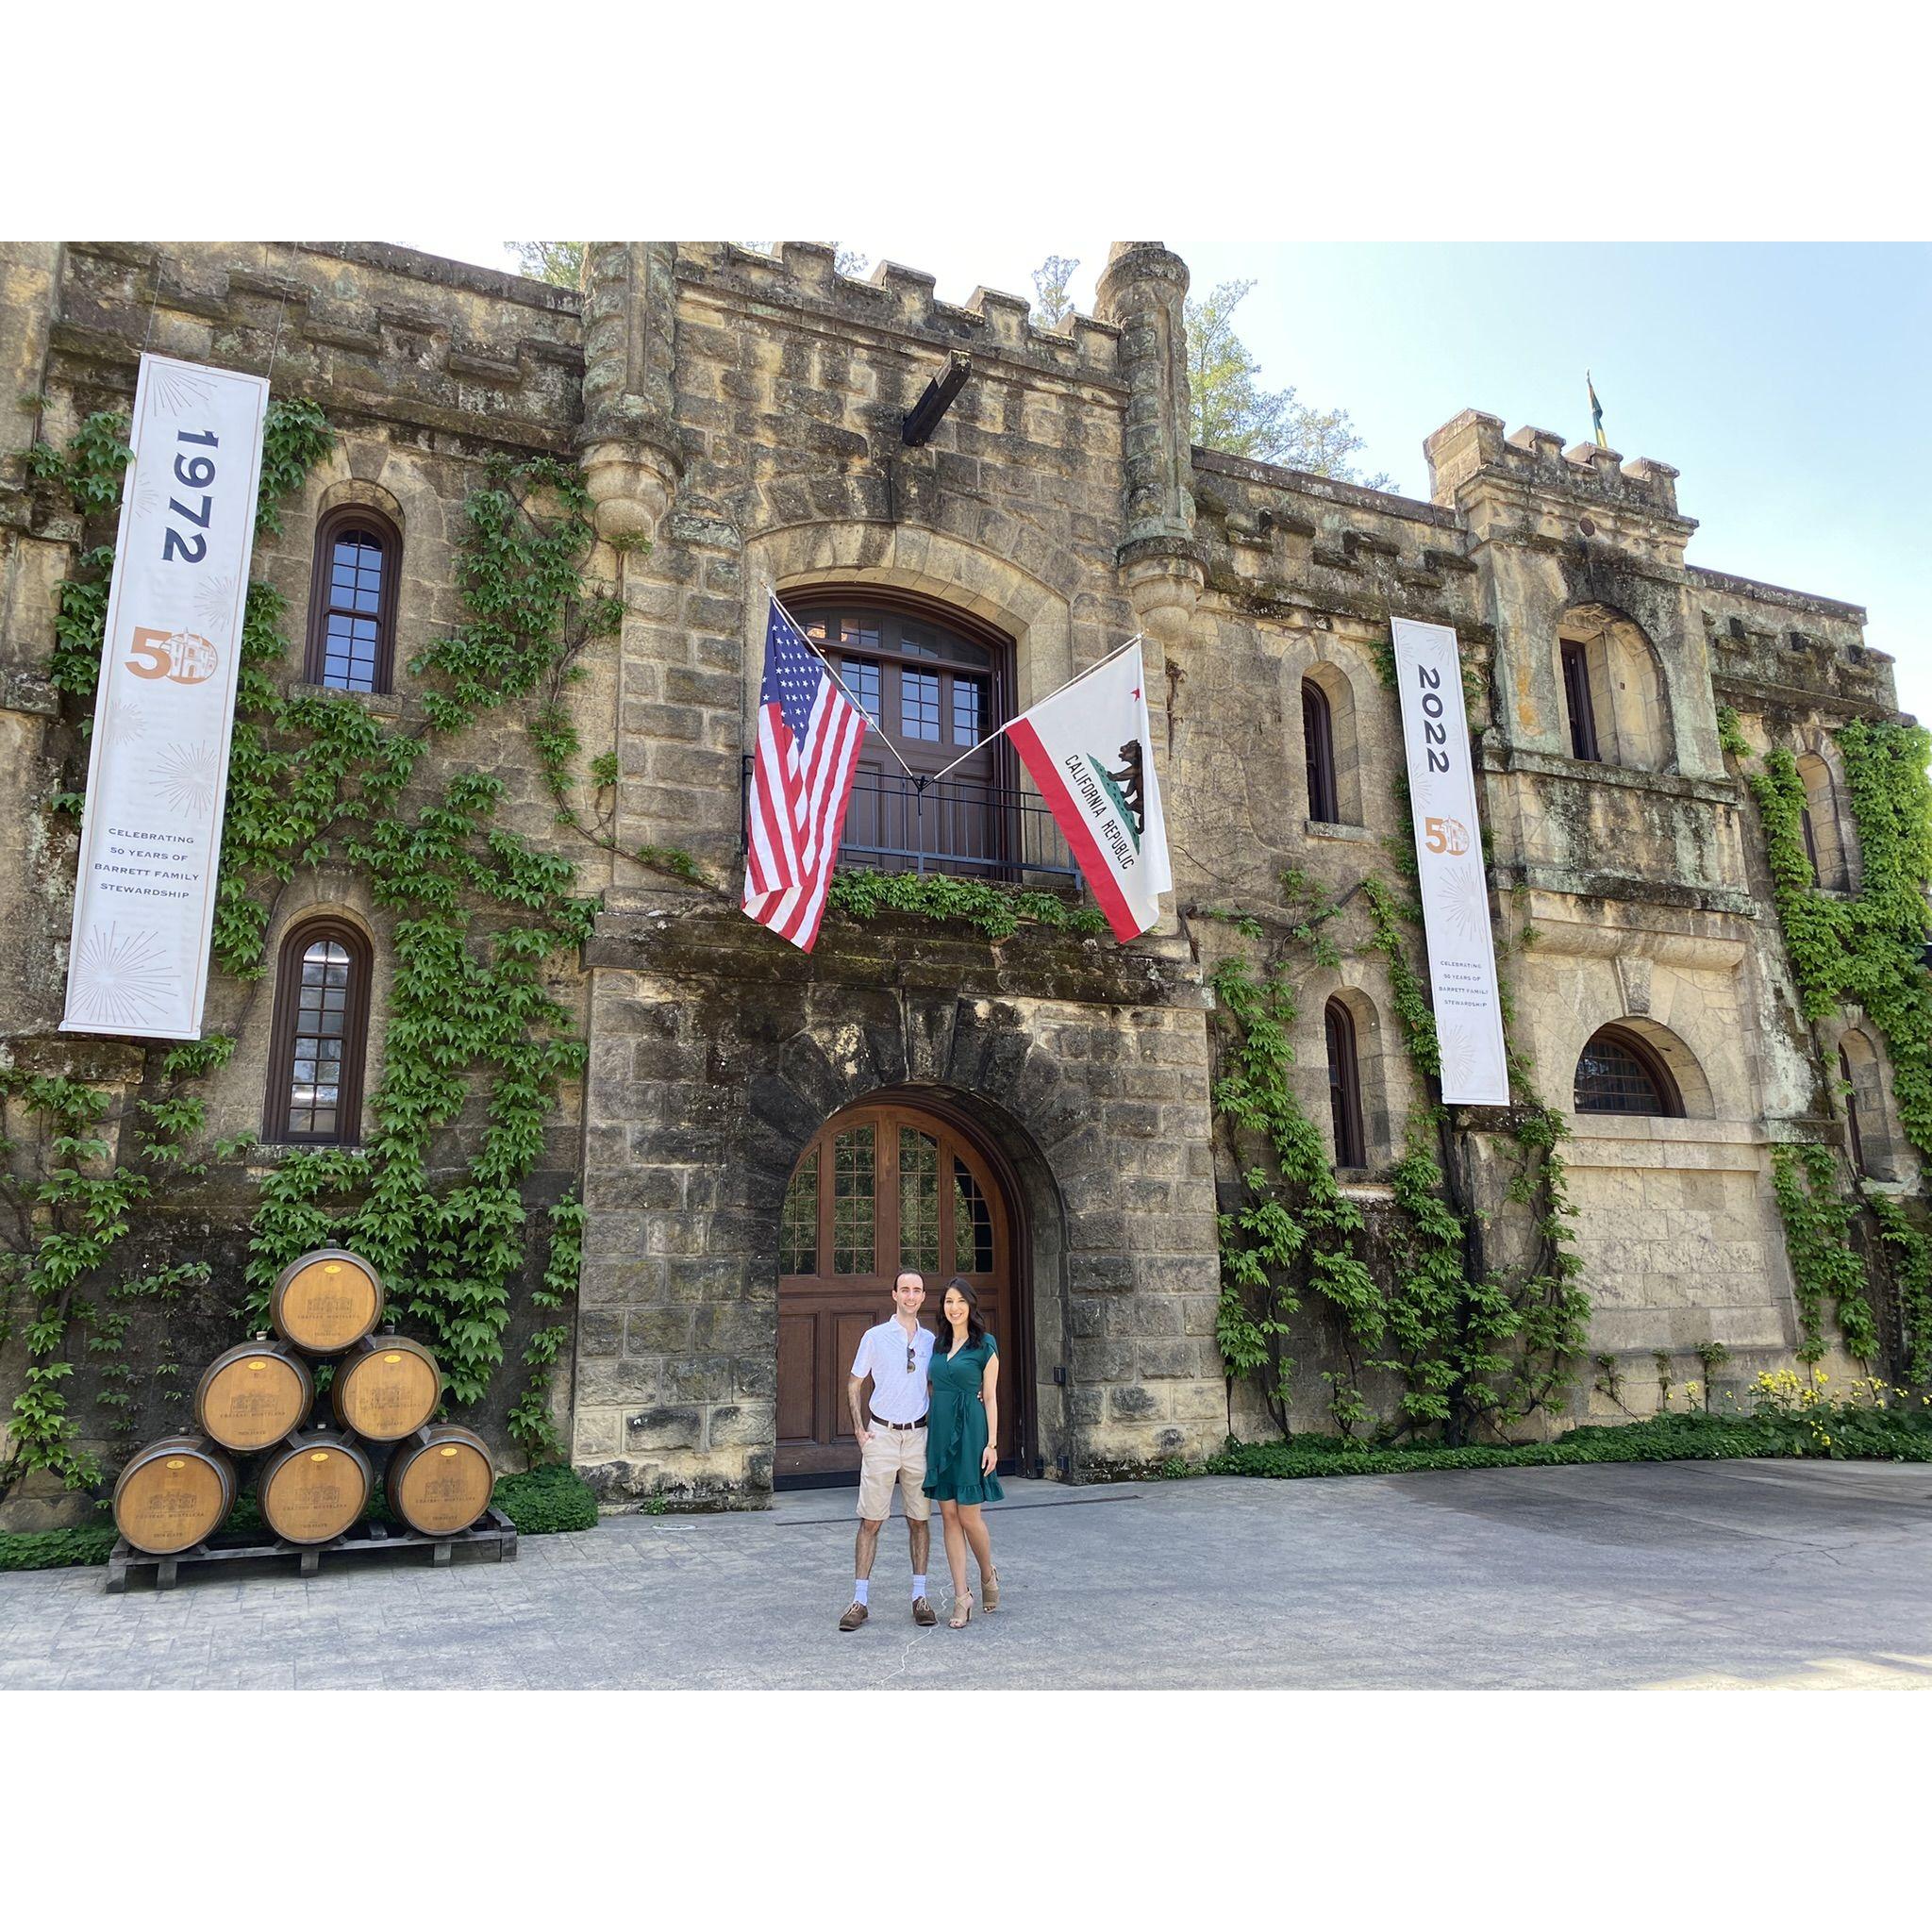 Chateau Montelena winery in Napa Valley